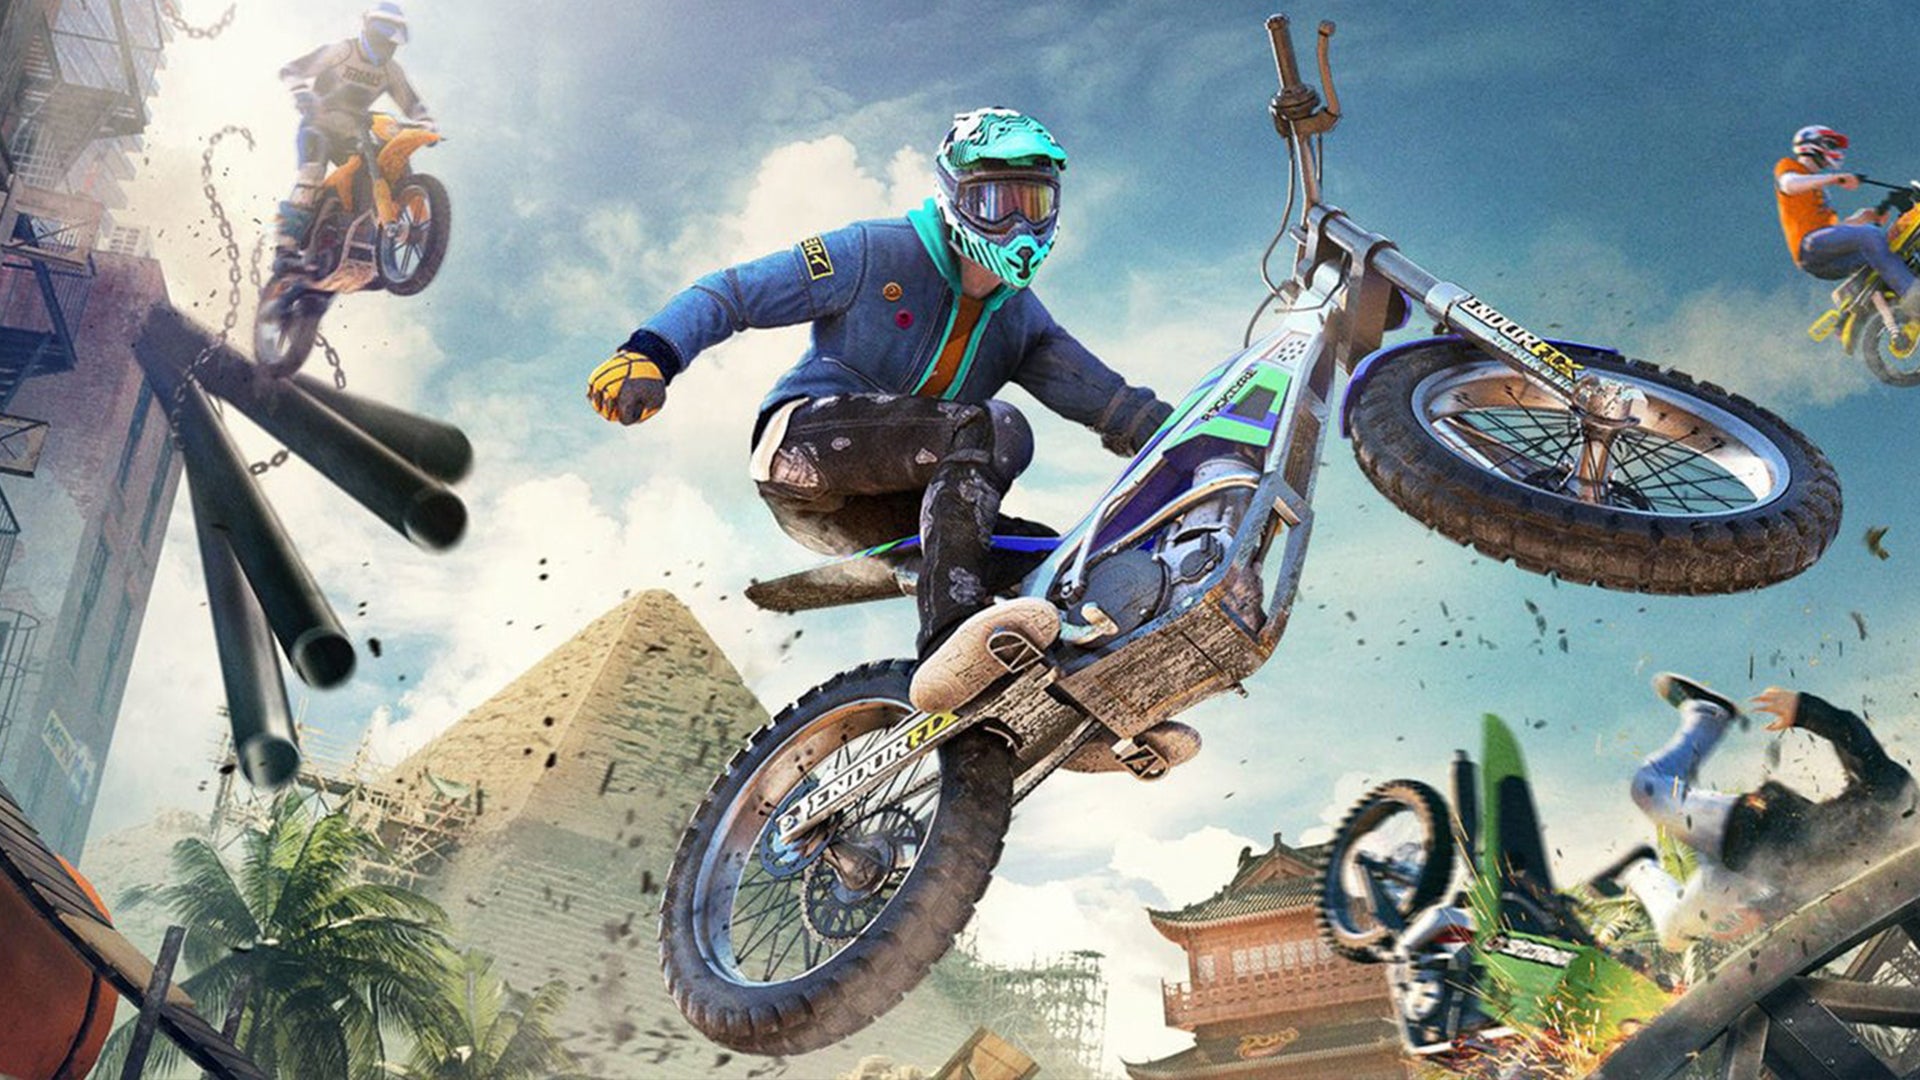 Image for Trials Rising: Switch Open Beta Tested! – RedLynx' series arrives on handheld